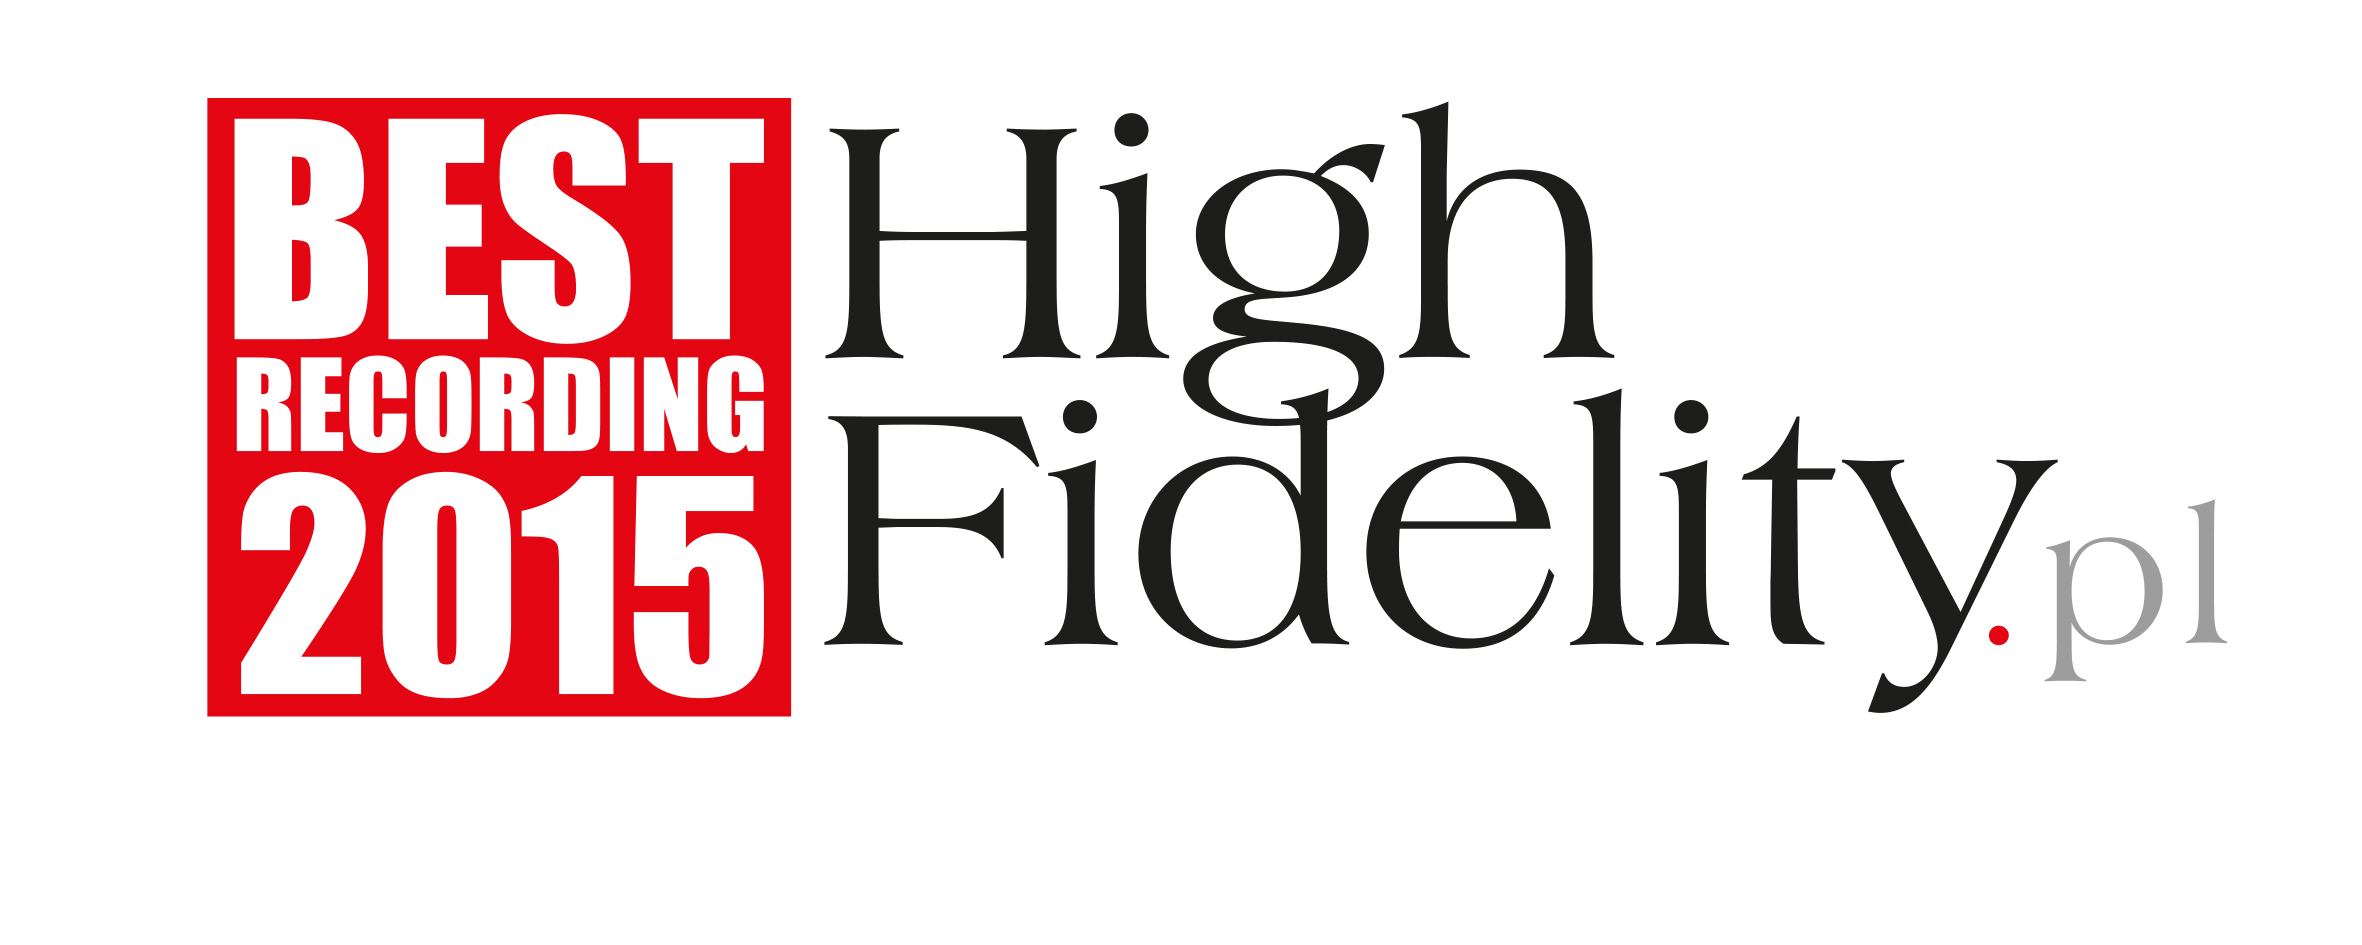 High Fidelity Best <br>Recording 2015